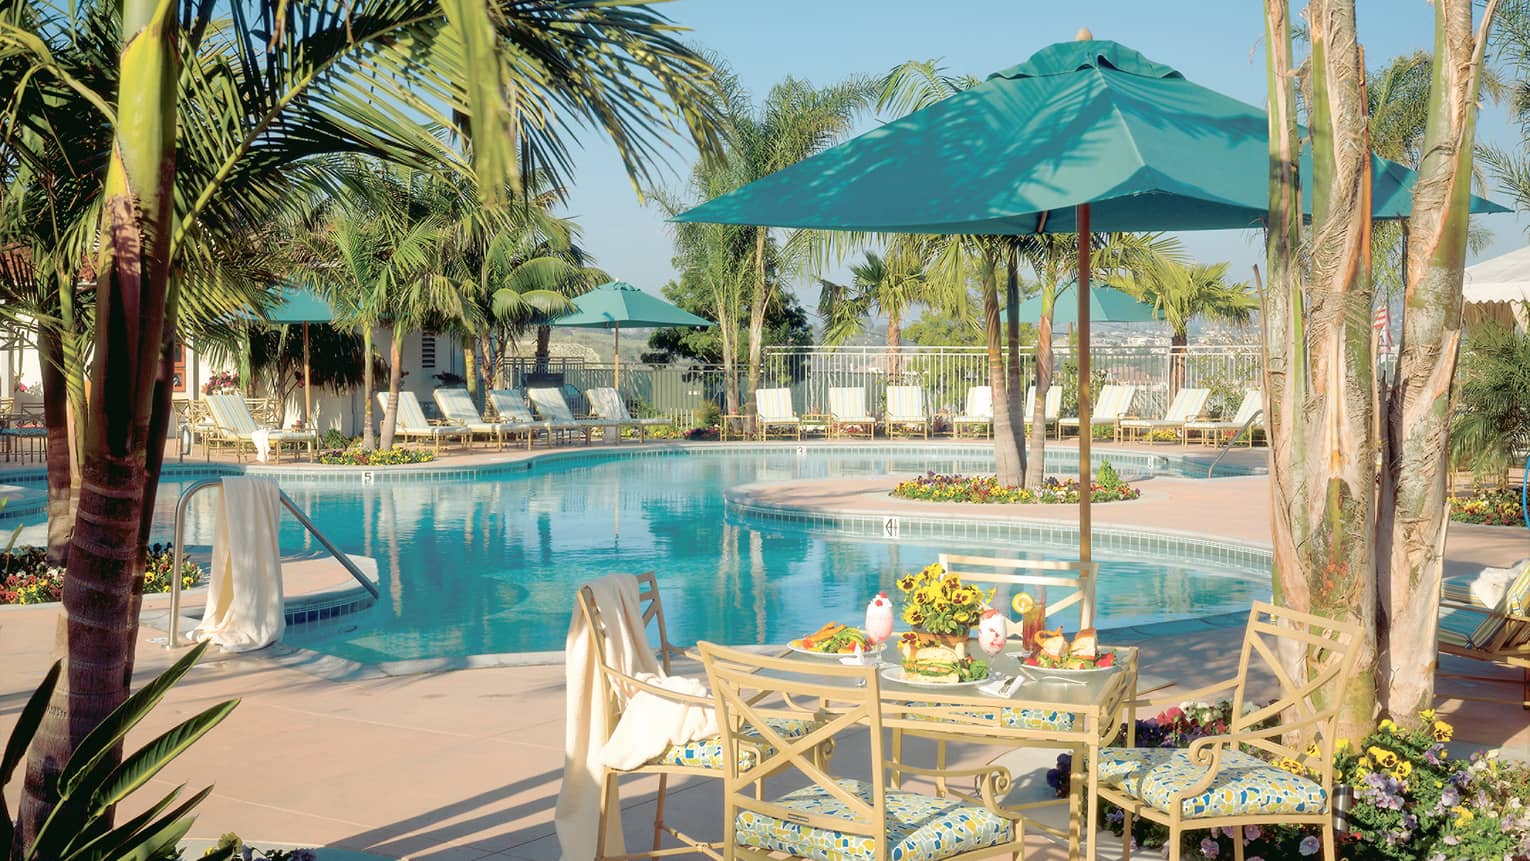 Outdoor pool and pool terrace, white lounge chairs, a square table and four chairs, turquoise umbrella, palms